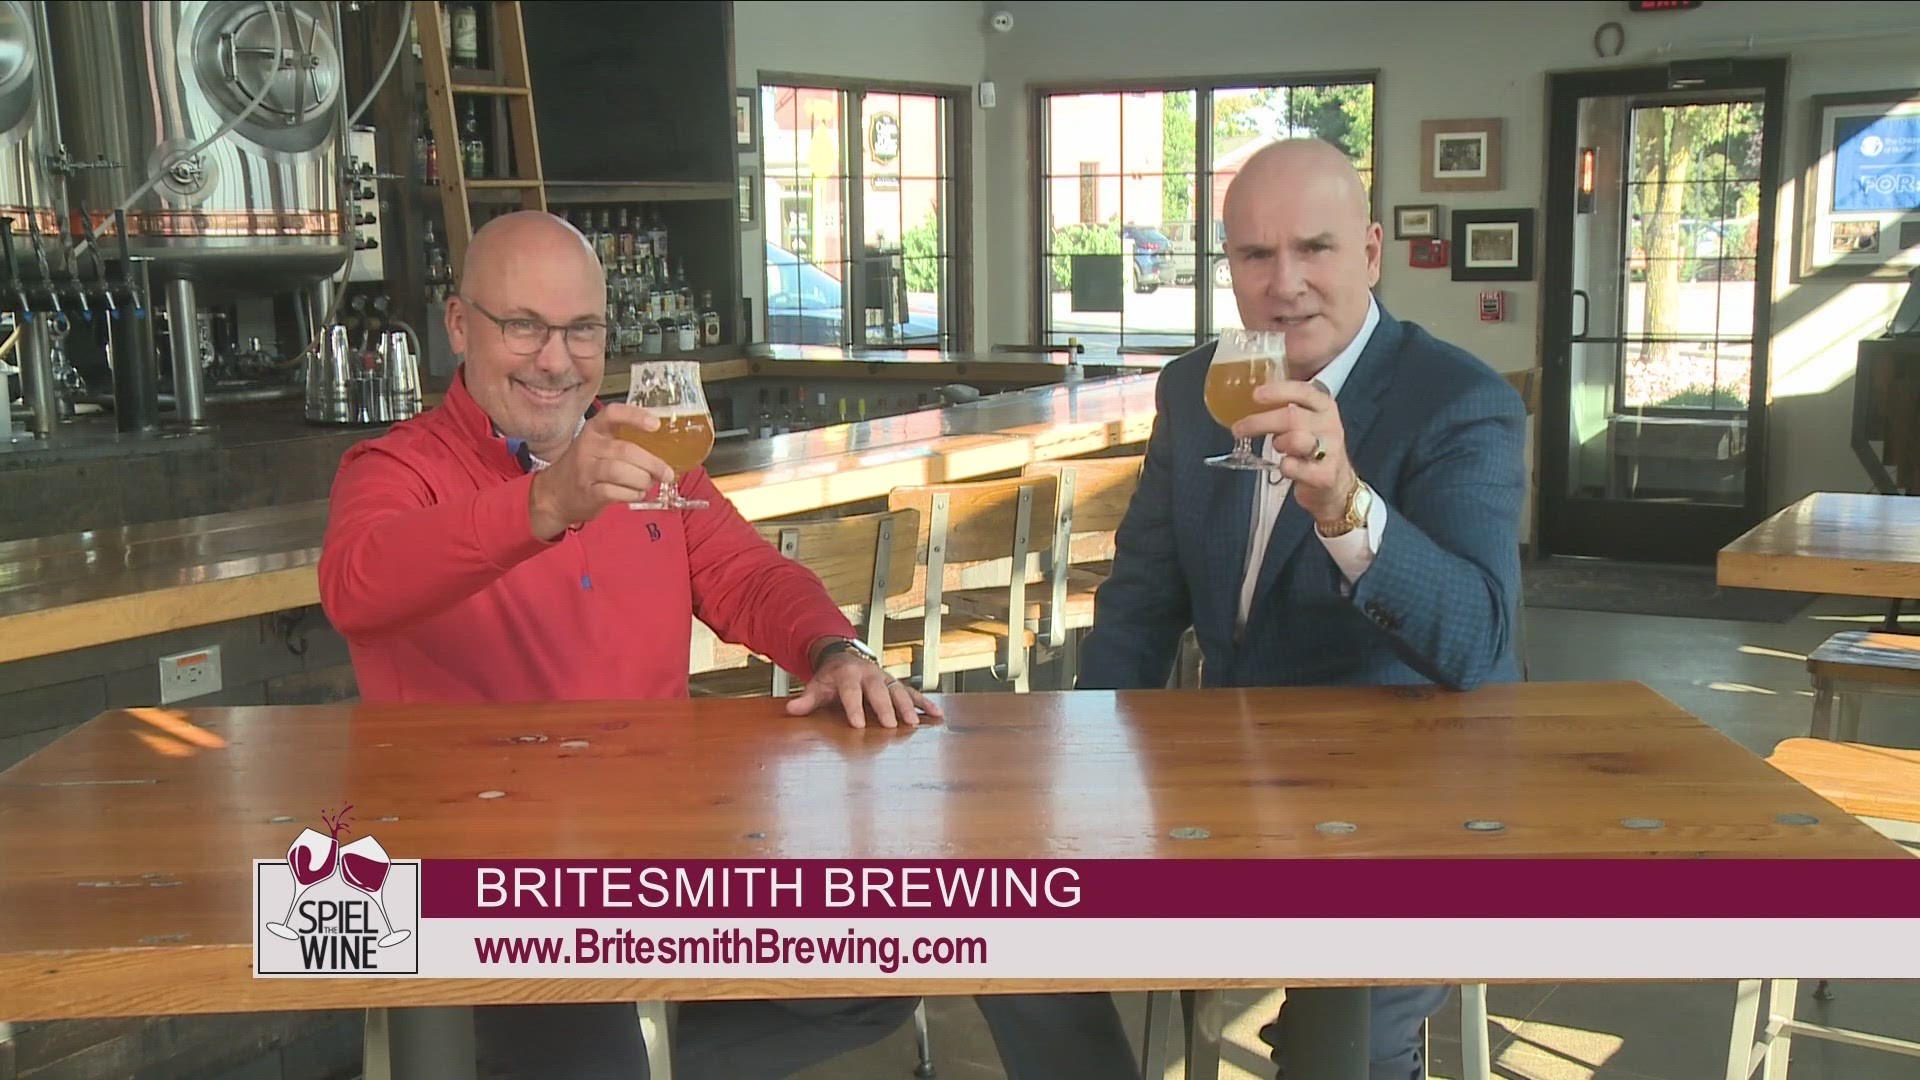 Spiel the Wine -- September 17 -- Segment 1 THIS VIDEO IS SPONSORED BY BRITESMITH BREWING